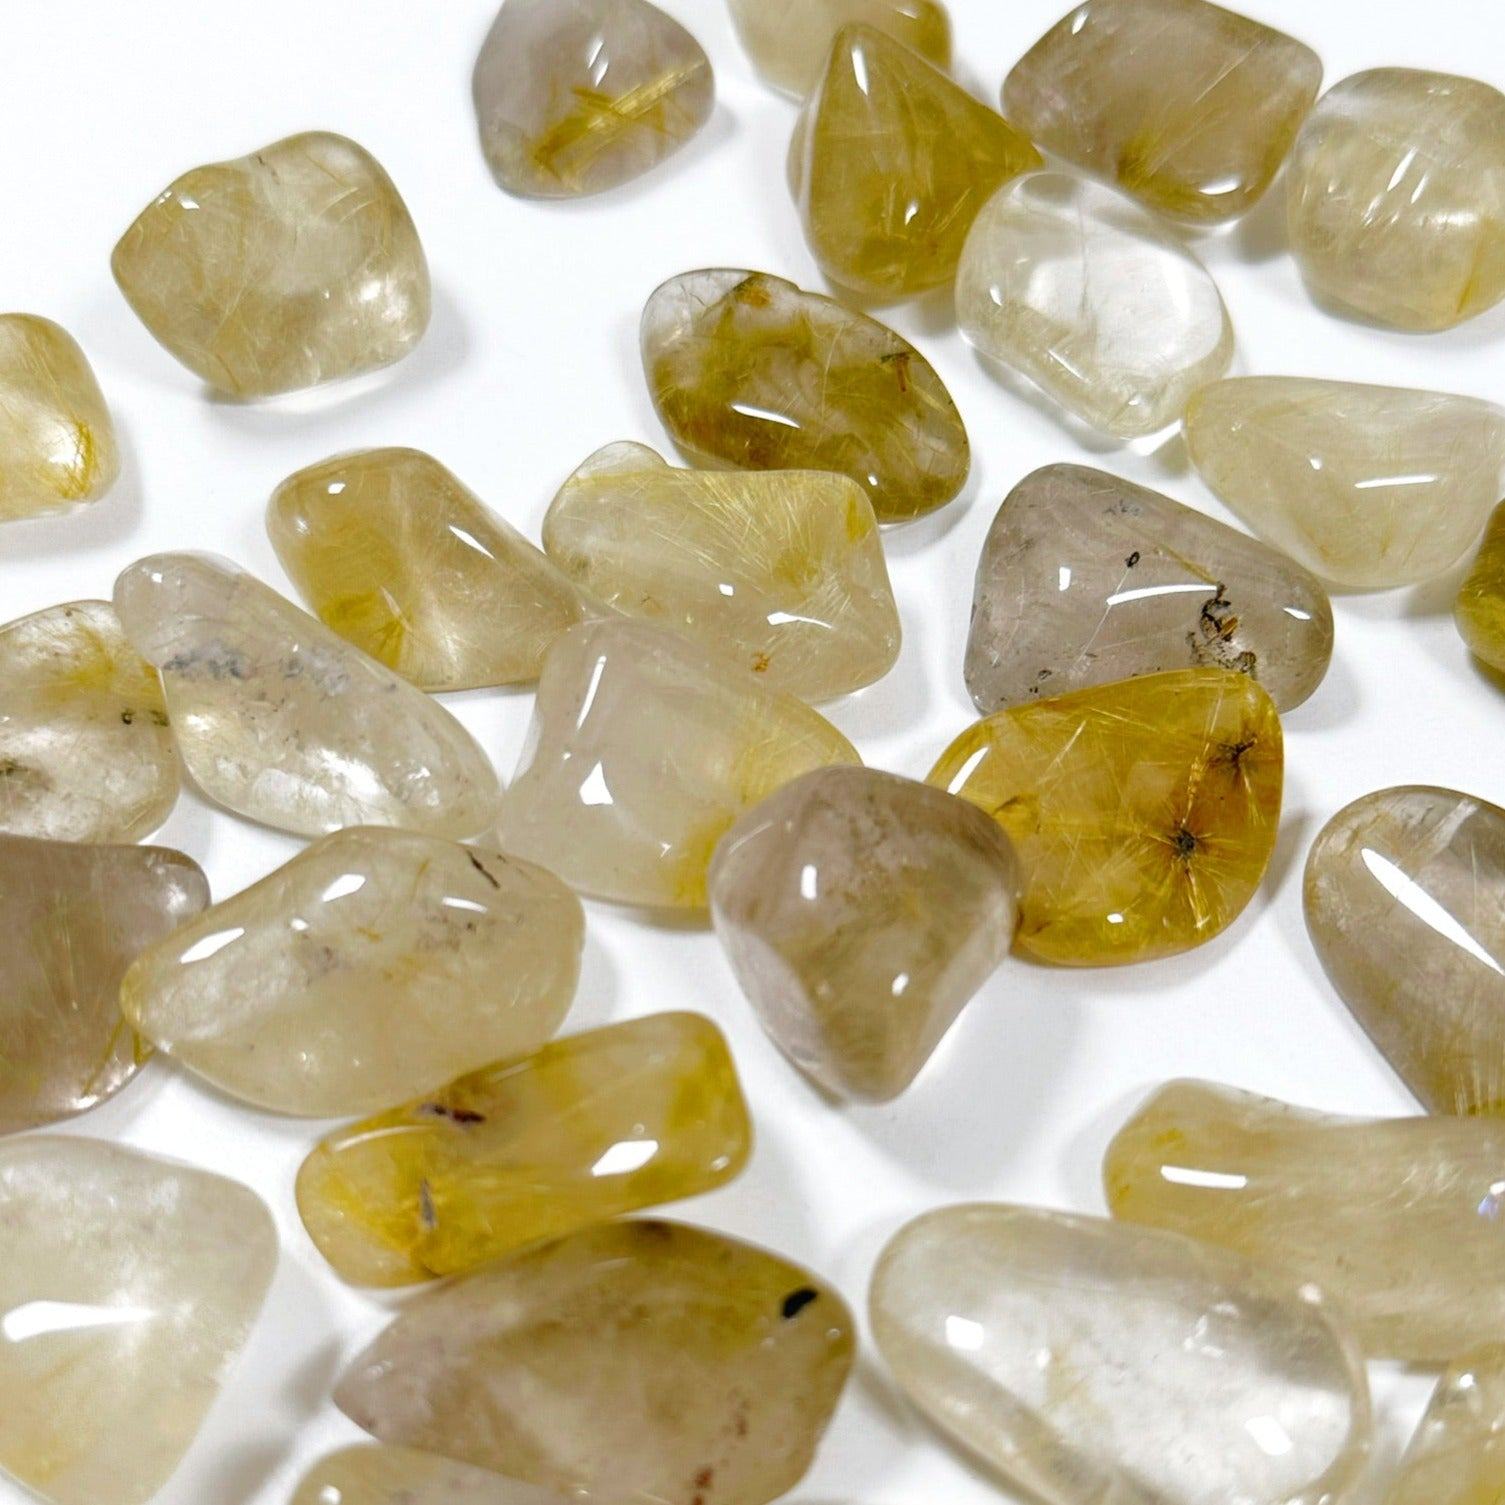 RUTILATED QUARTZ TUMBLE - 33 bday, emotional support, end of year sale, focus gift bundle, golden rutilated quartz, holiday sale, pocket crystal, pocket crystals, pocket stone, quartz, recently added, rutilated quartz, tumble, tumbled, tumbled stone, tumbles - The Mineral Maven